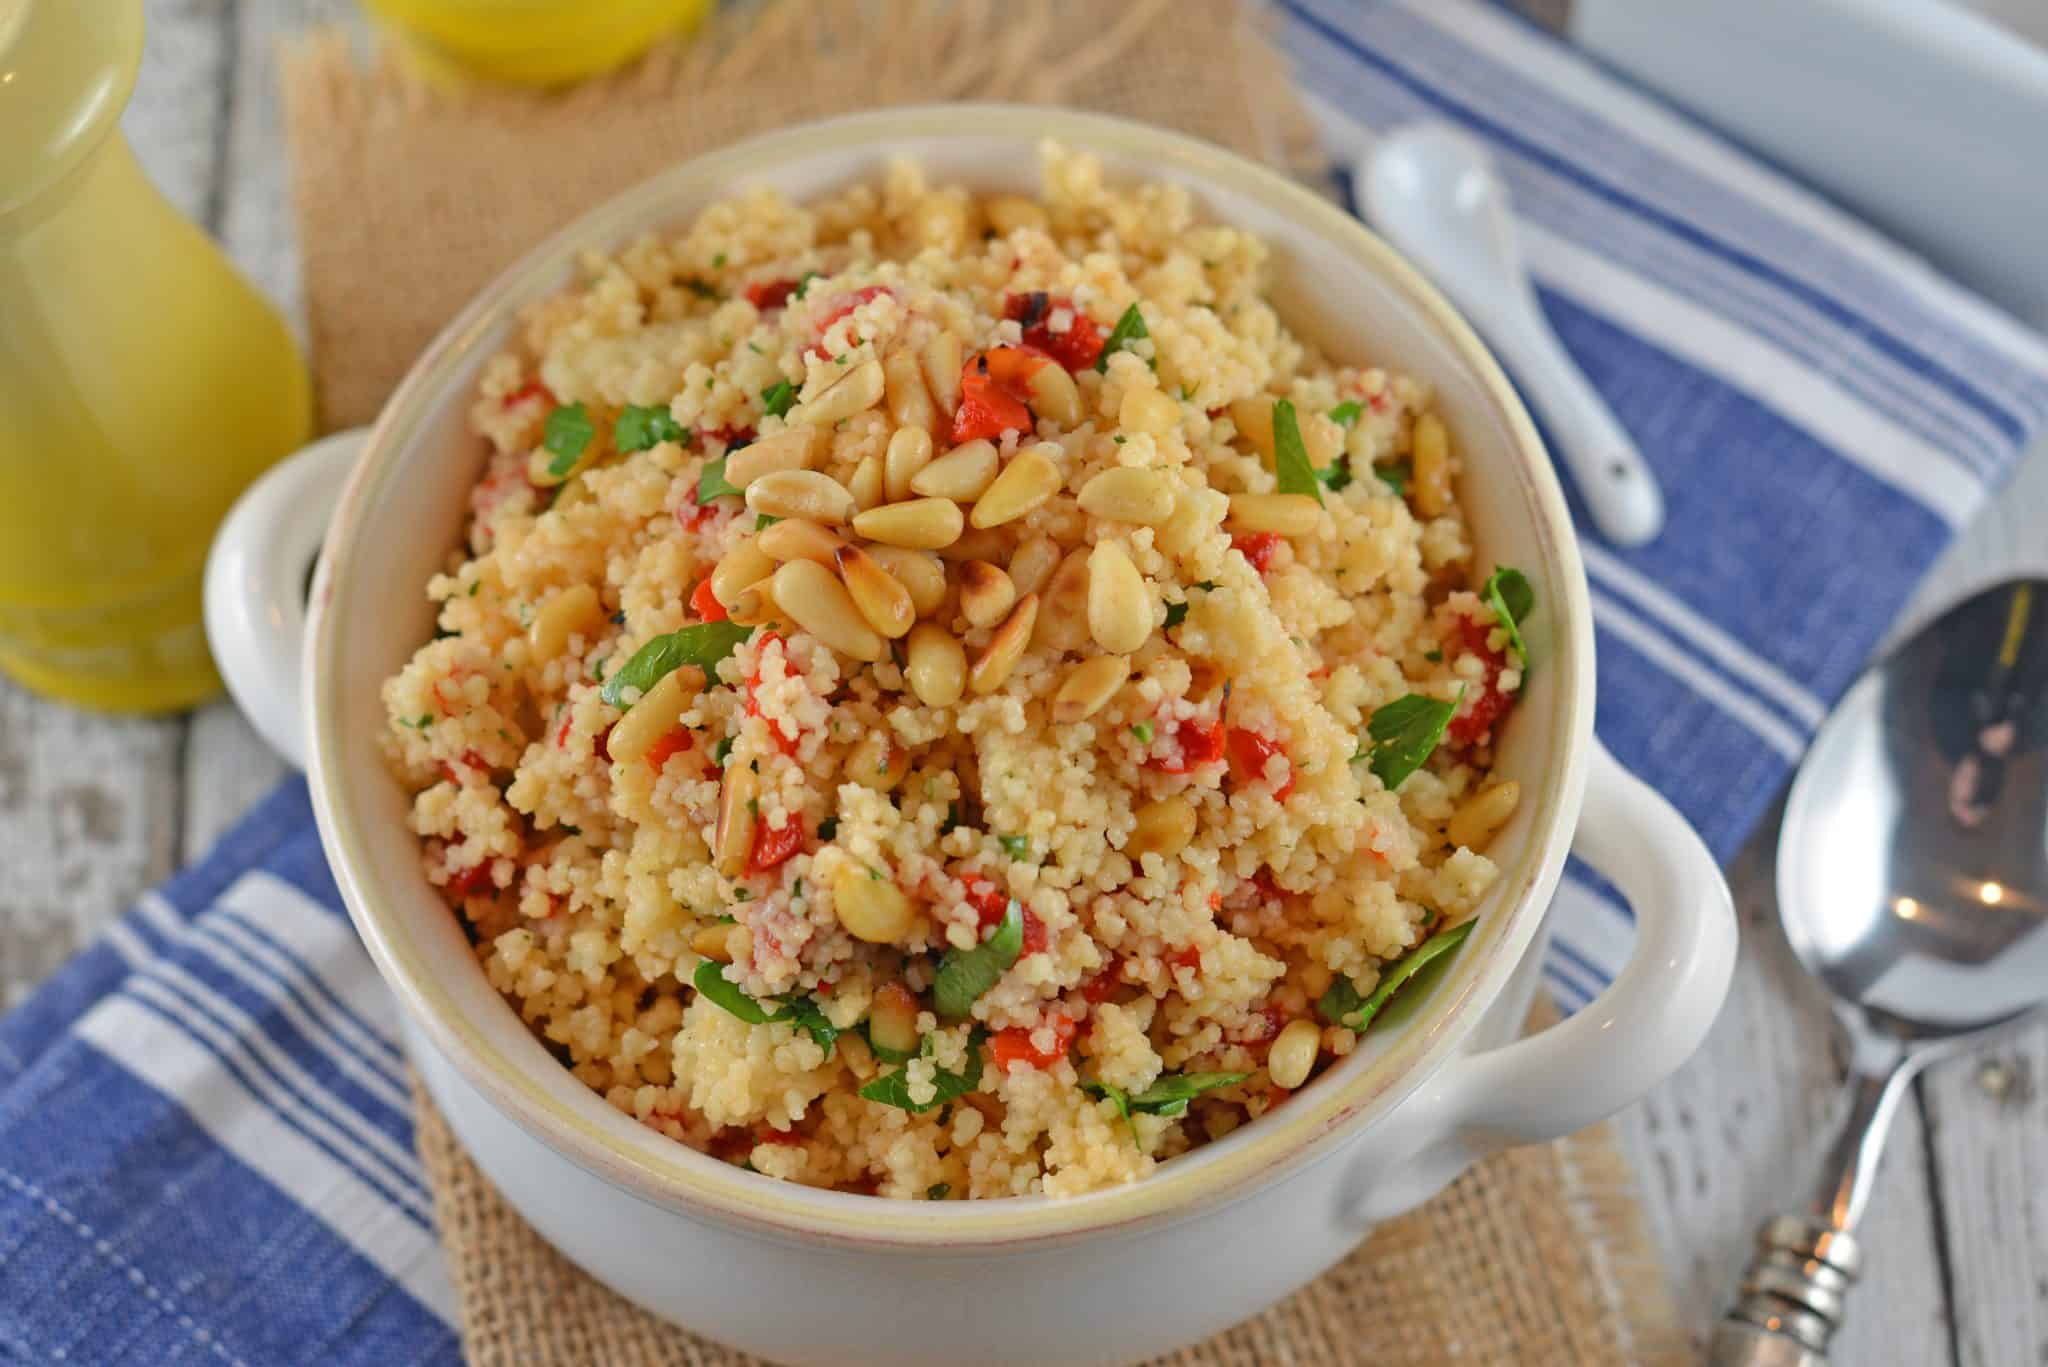 Italian Couscous is an easy side dish recipe perfect for serving with any meal. Sun dried tomatoes, garlic and pinenuts spruce up the dish!